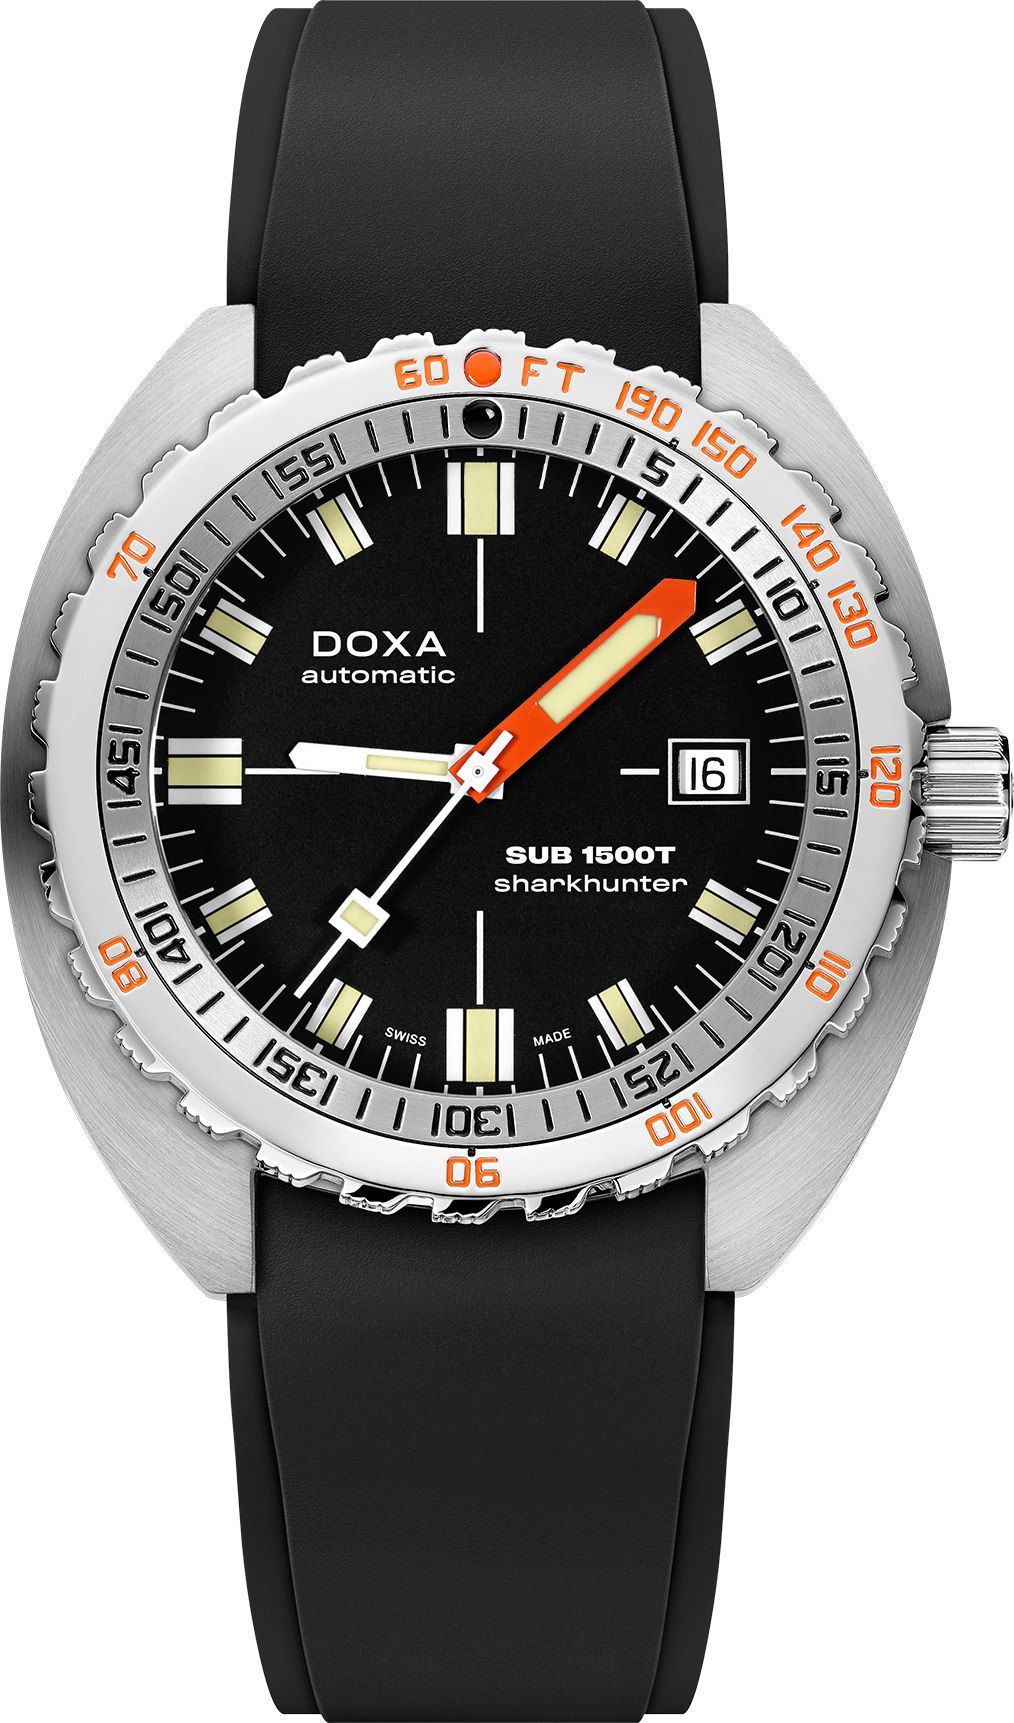 Doxa SUB 1500T Sharkhunter Black Dial 45 mm Automatic Watch For Men - 1